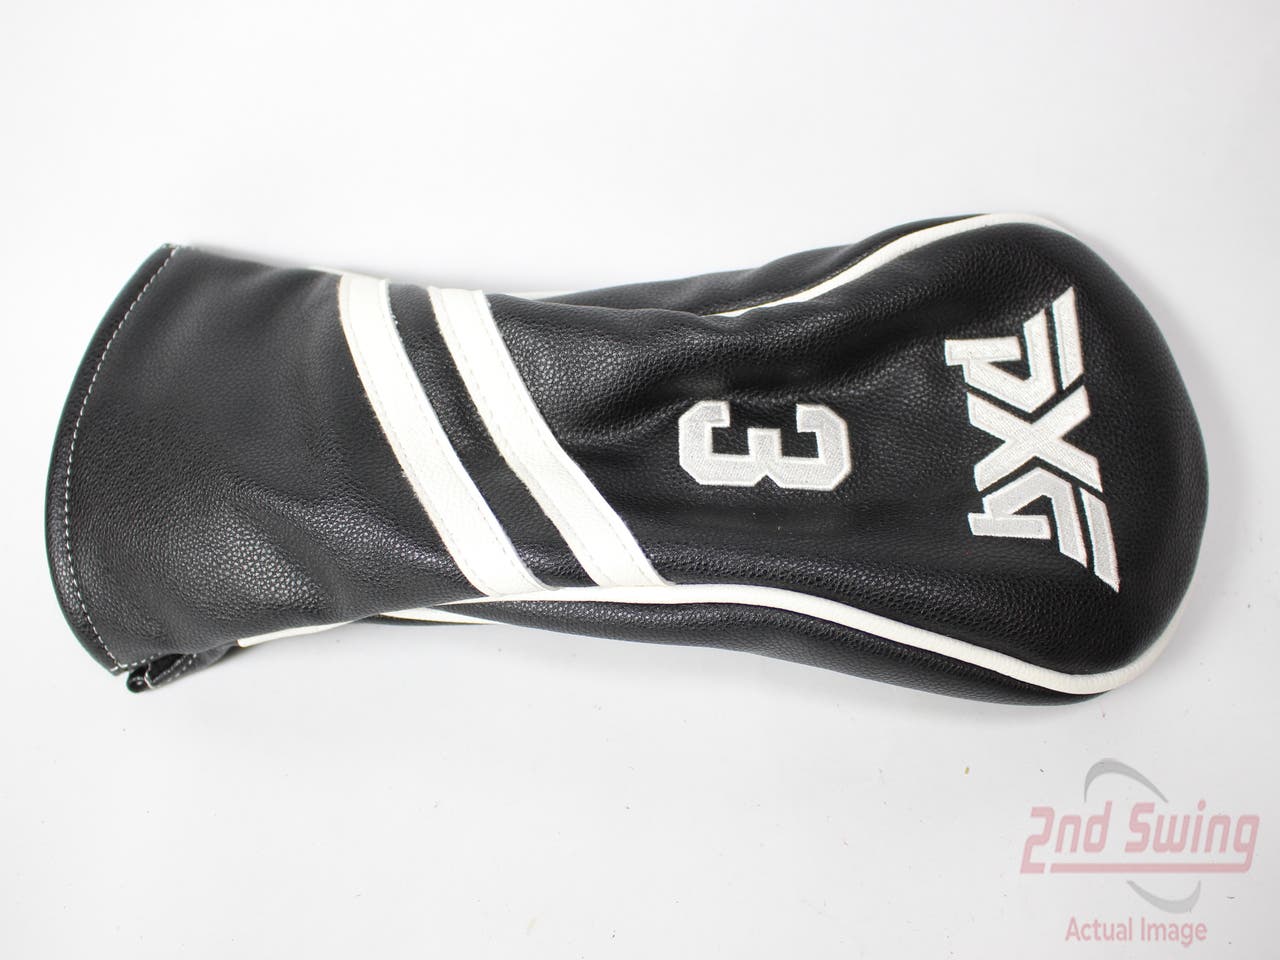 New PXG 0341 3 Fairway Wood Headcover Head Cover Leather Black White